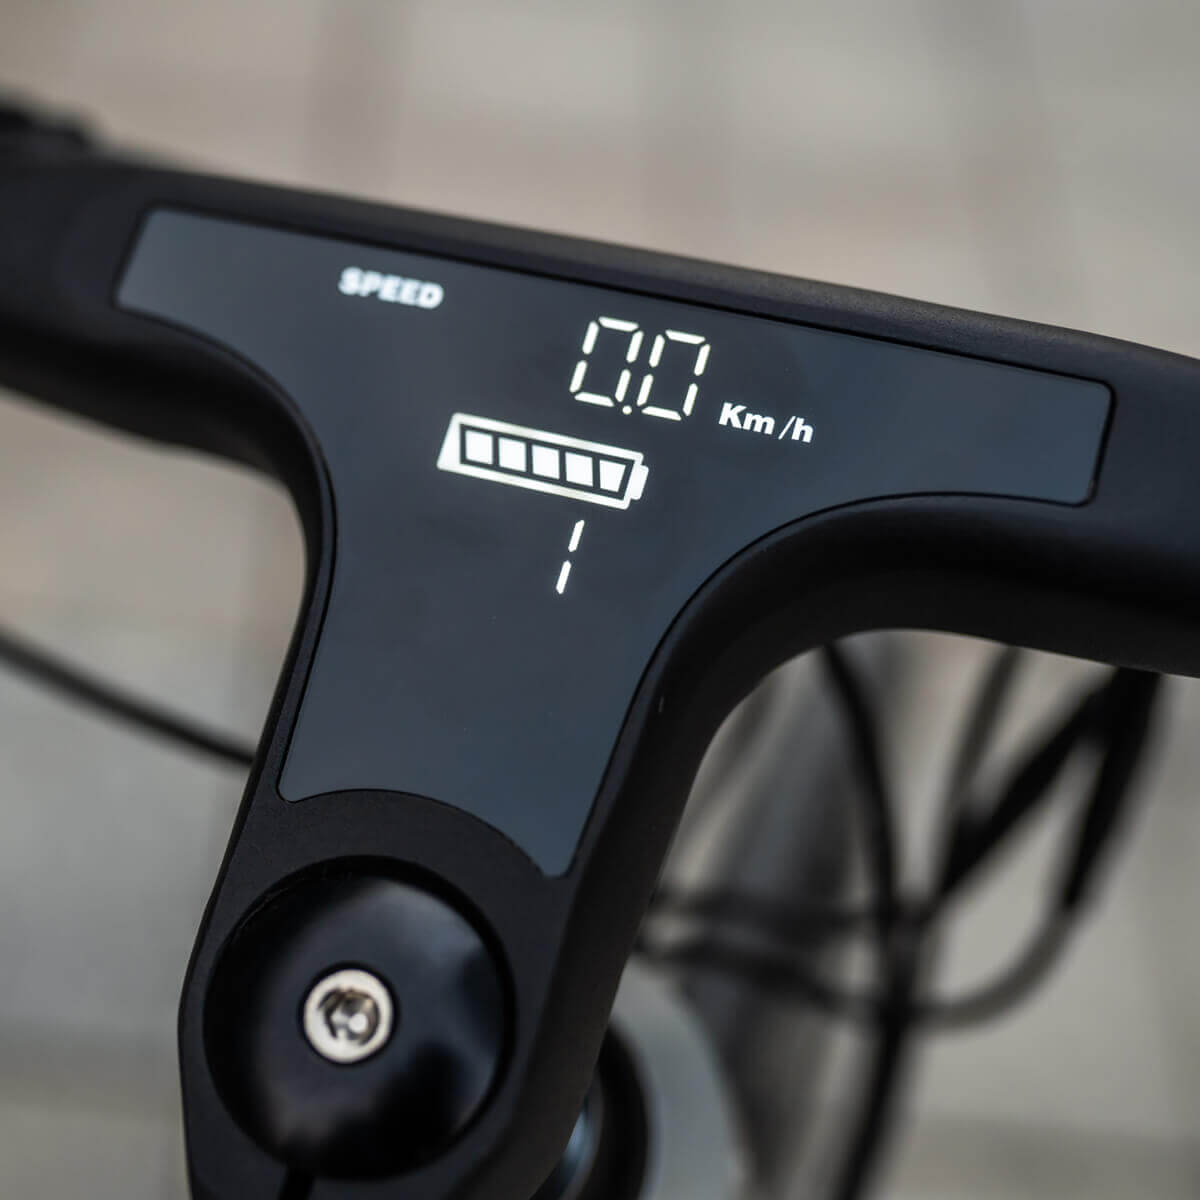 KAKUKA K70 e-bike is equipped with a multi-functional large LCD display that lets you customize your ride and check your speed, distance, ride assist, and battery level at a glance.